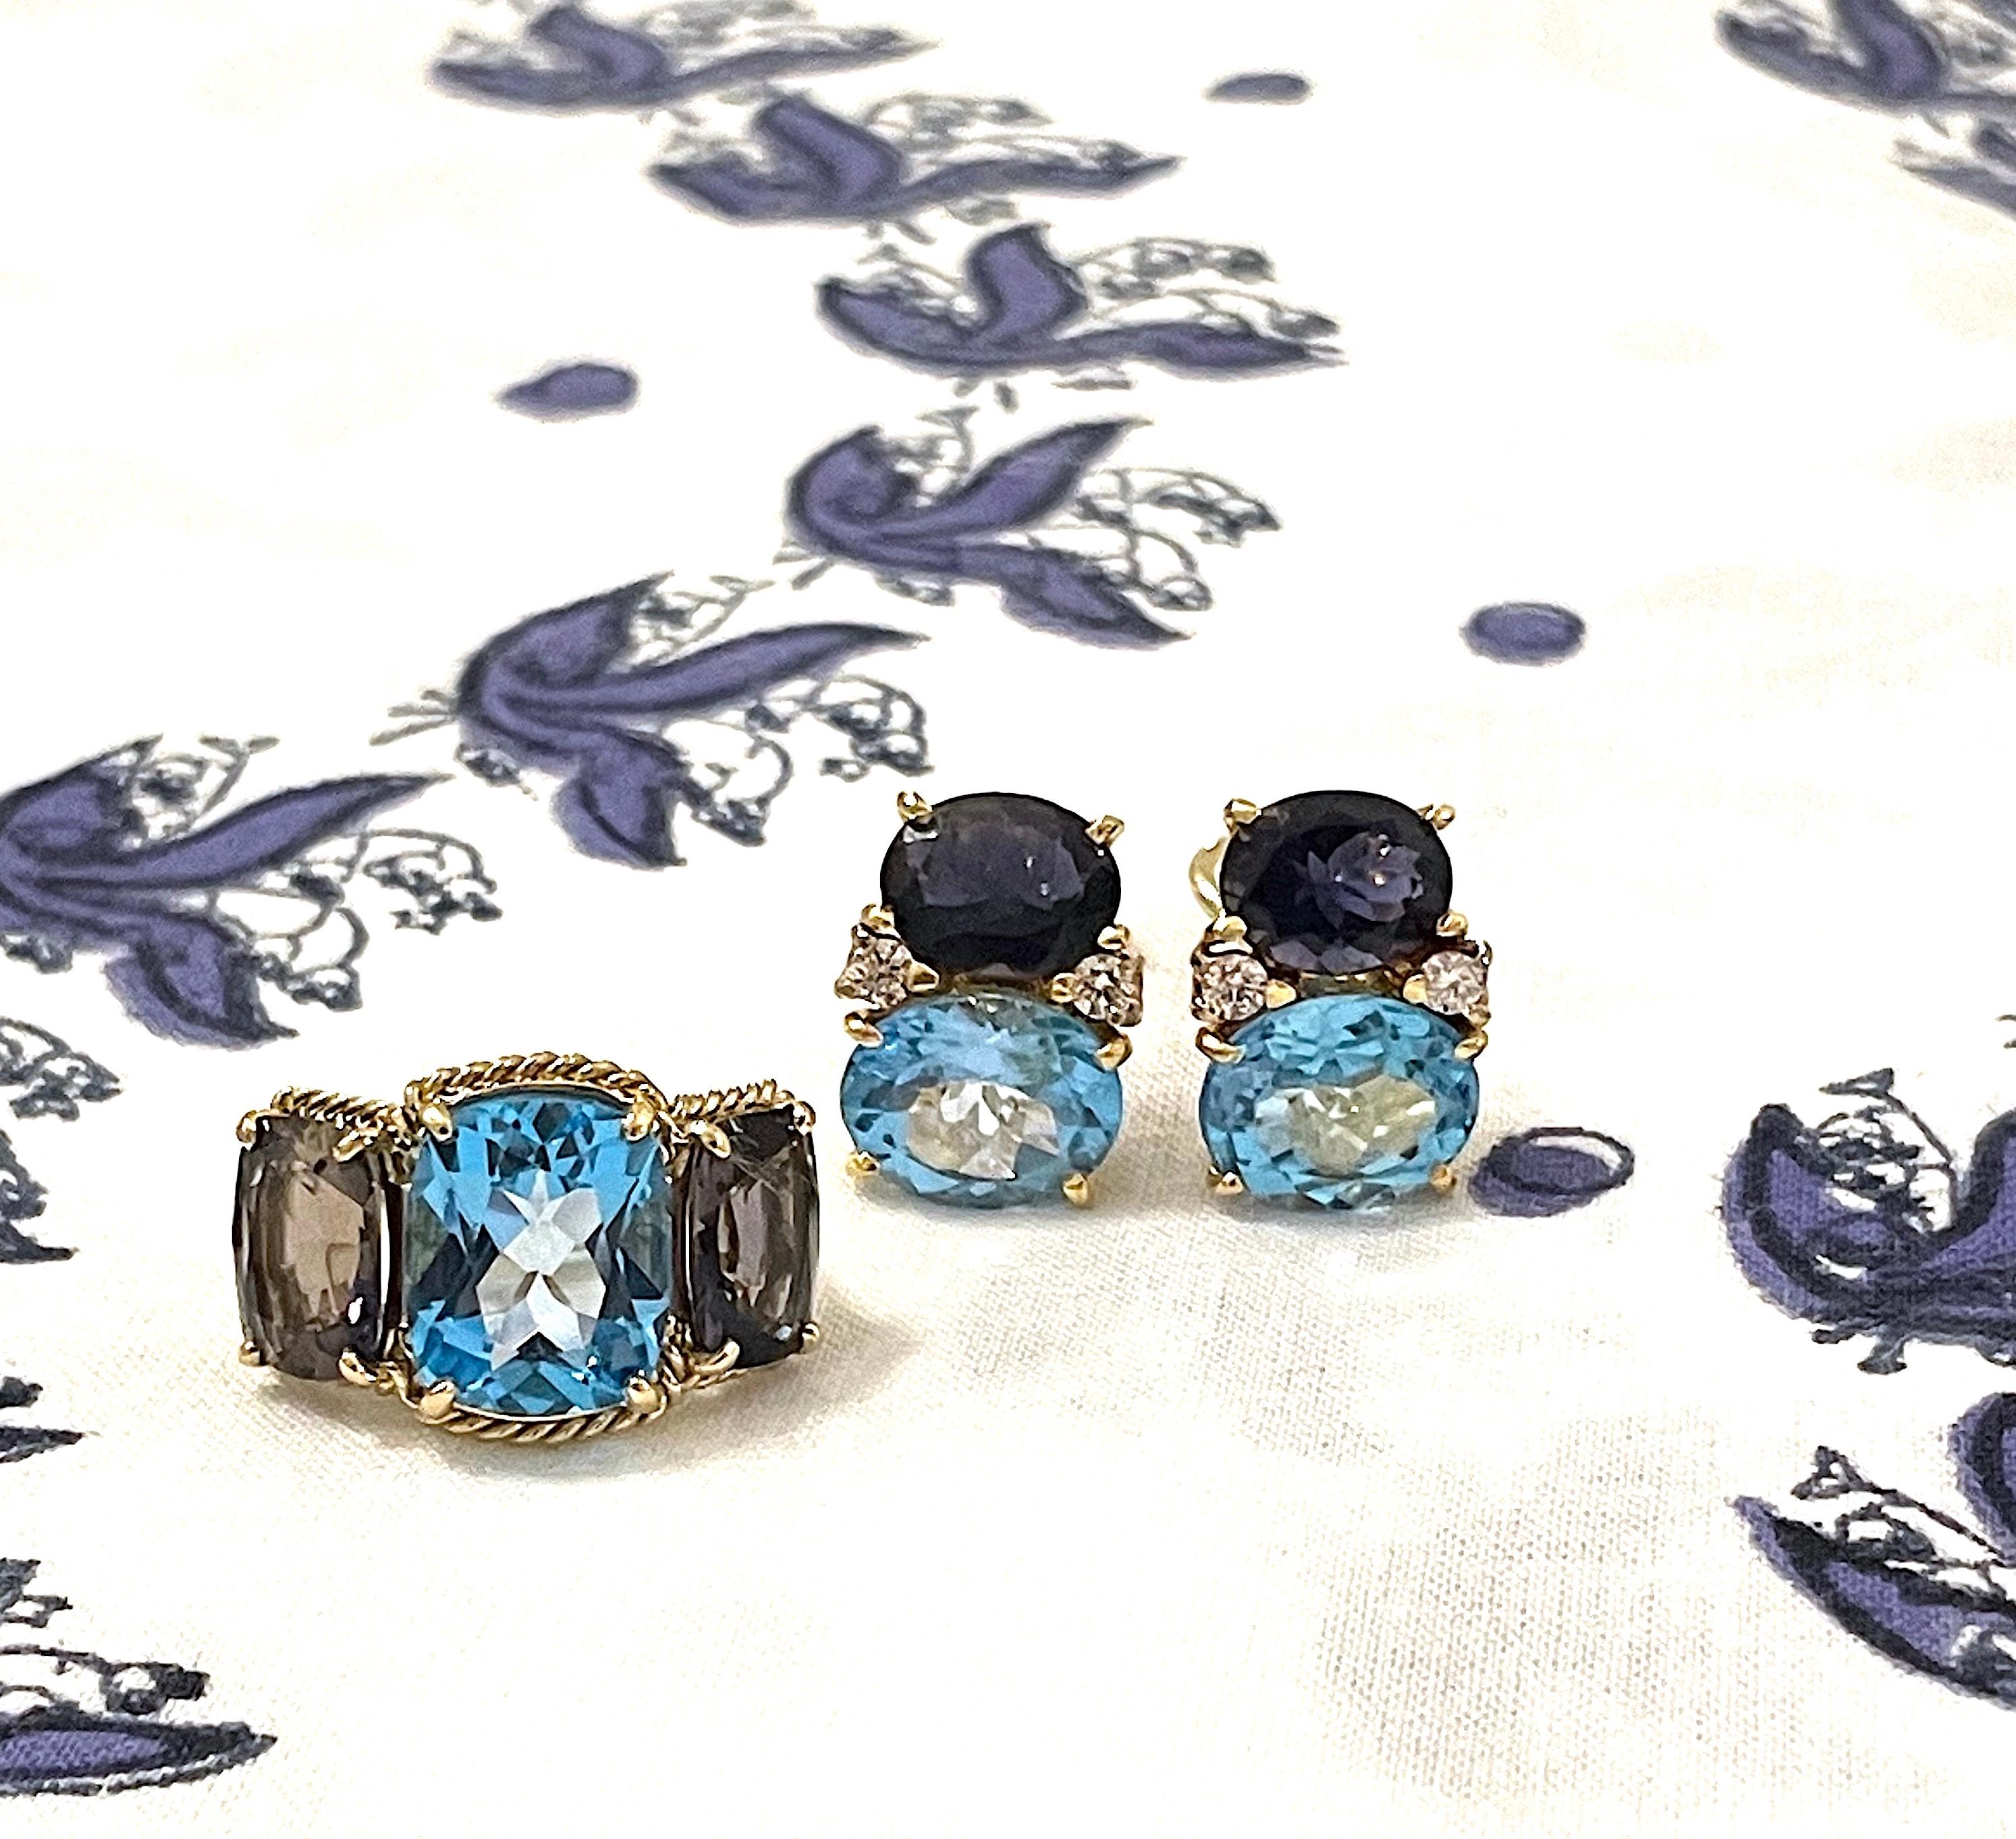 Medium 18kt Yellow Gold GUM DROP™ earrings with Iolite (approximately 2.5 cts each), Blue Topaz (approximately 5 cts each), and 4 diamonds weighing ~0.40 cts.

They can be made in ANY color stone combination that you would like!
Please contact us